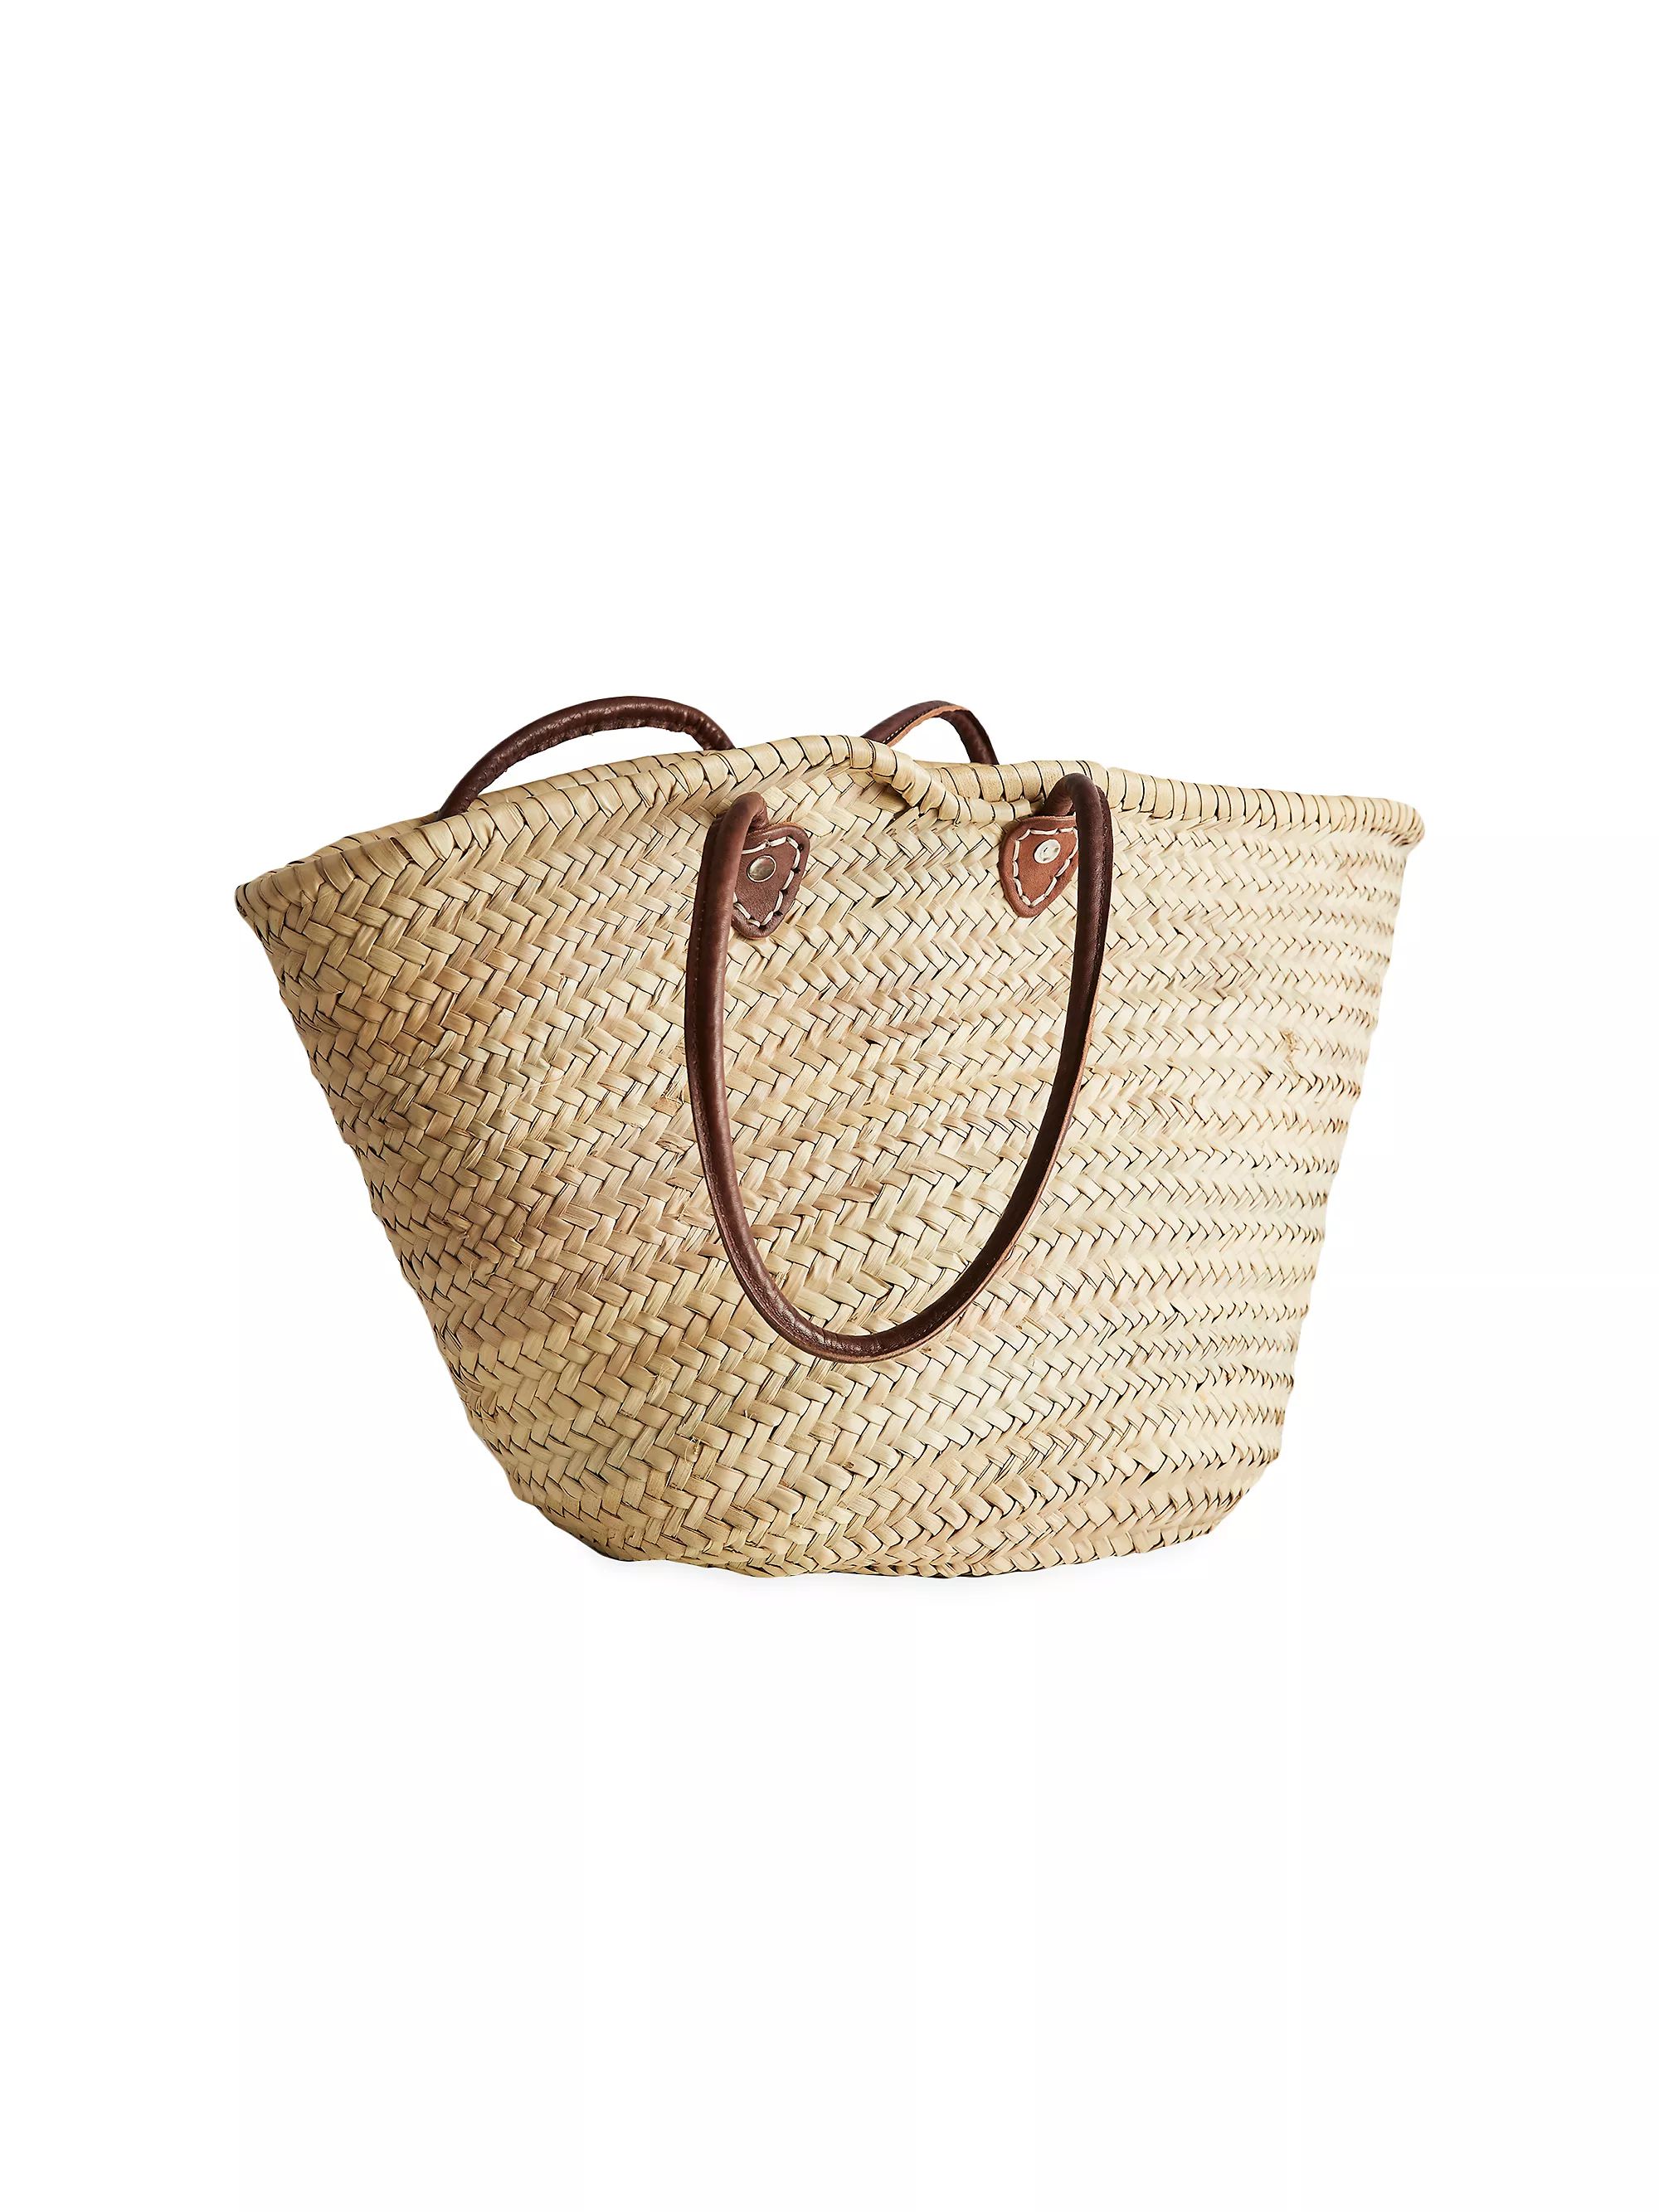 Moroccan Shopping Basket - Large Leather Strap | Saks Fifth Avenue